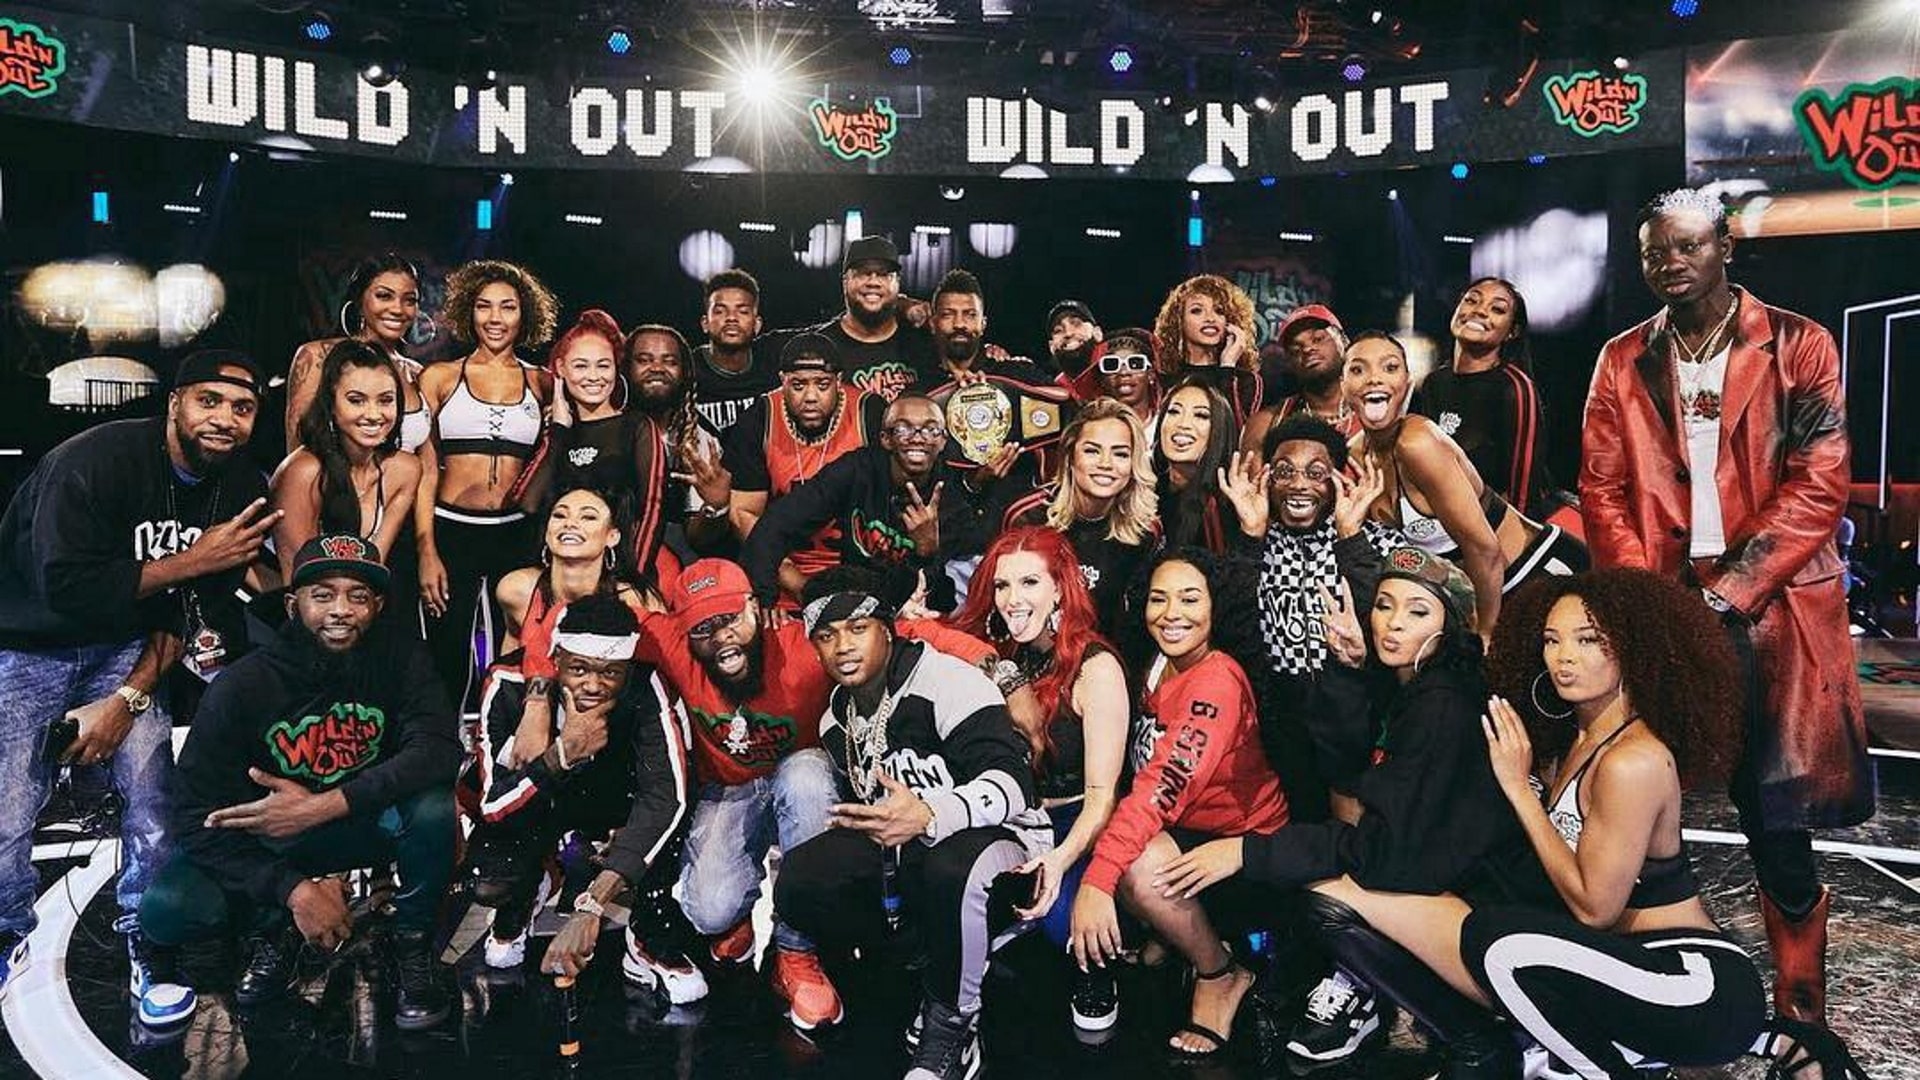 Wild n out characters